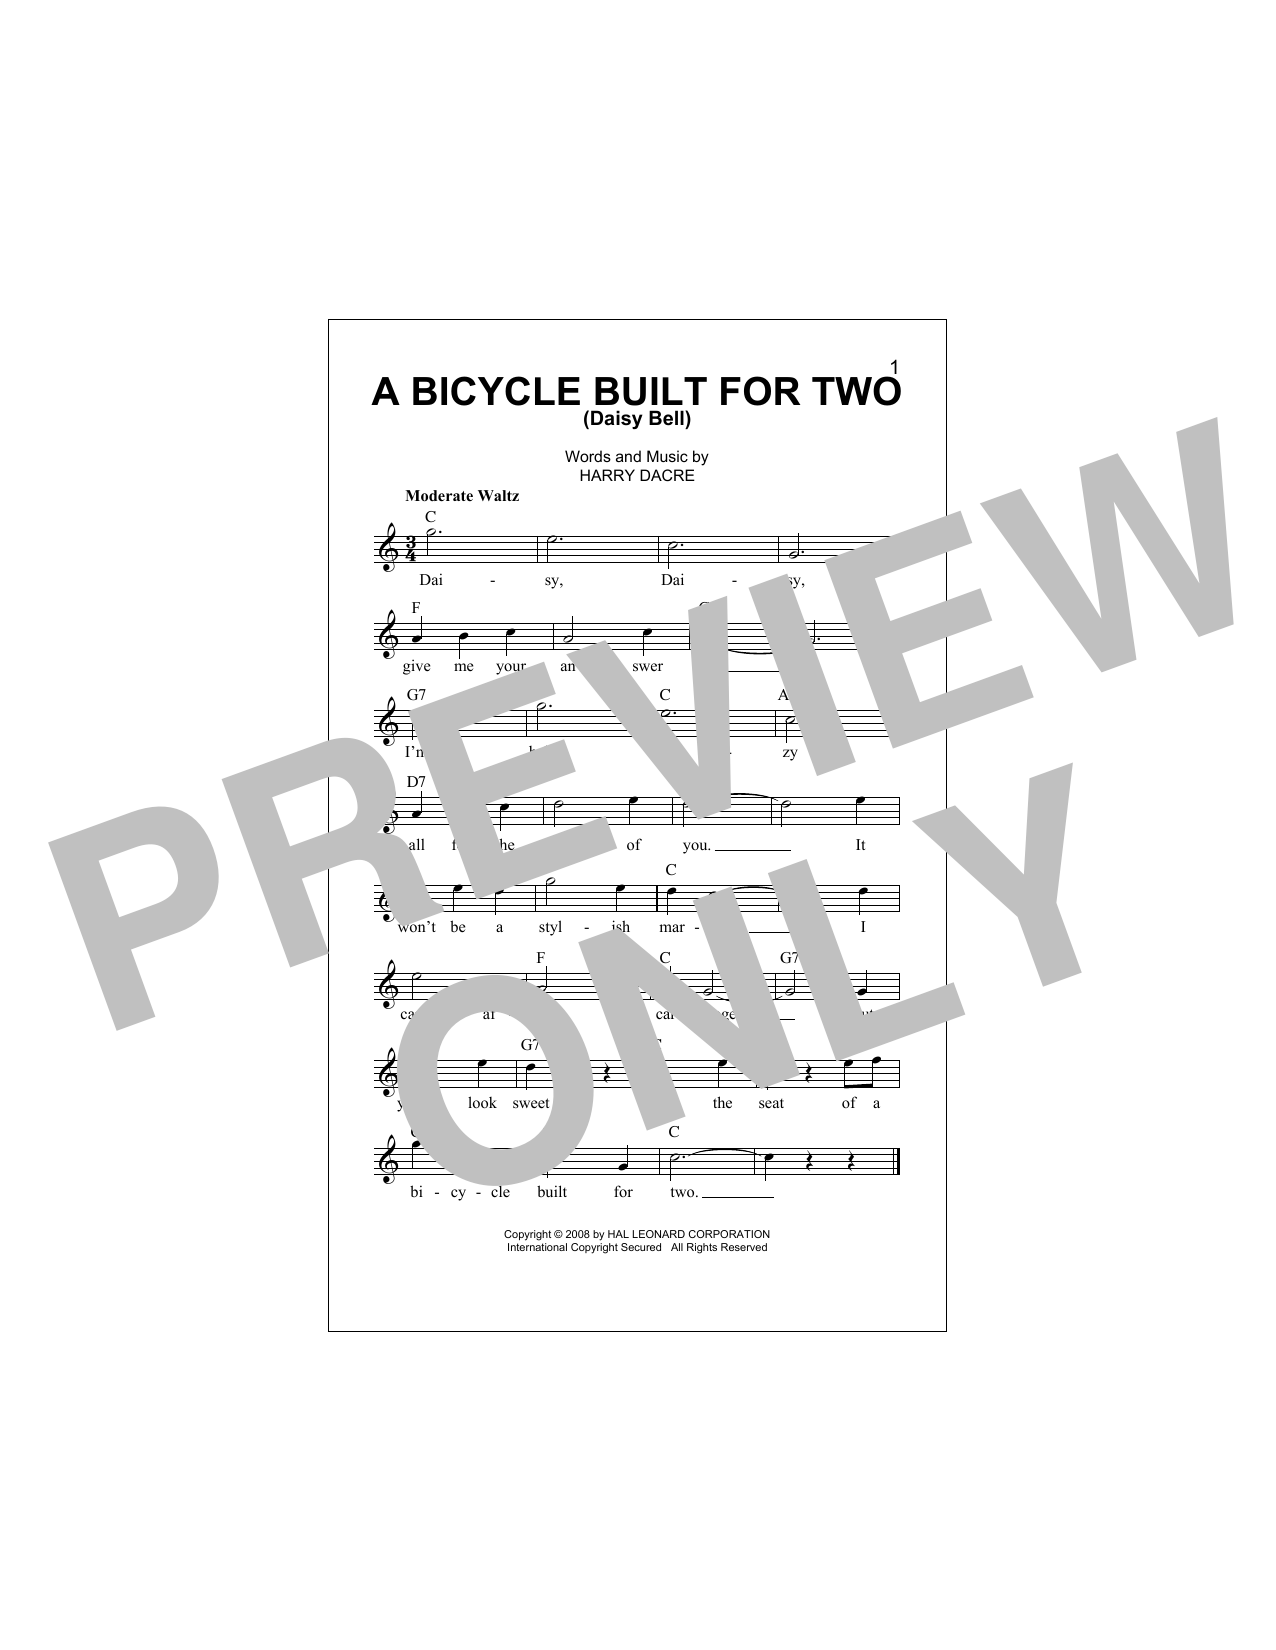 Download Harry Dacre A Bicycle Built For Two (Daisy Bell) Sheet Music